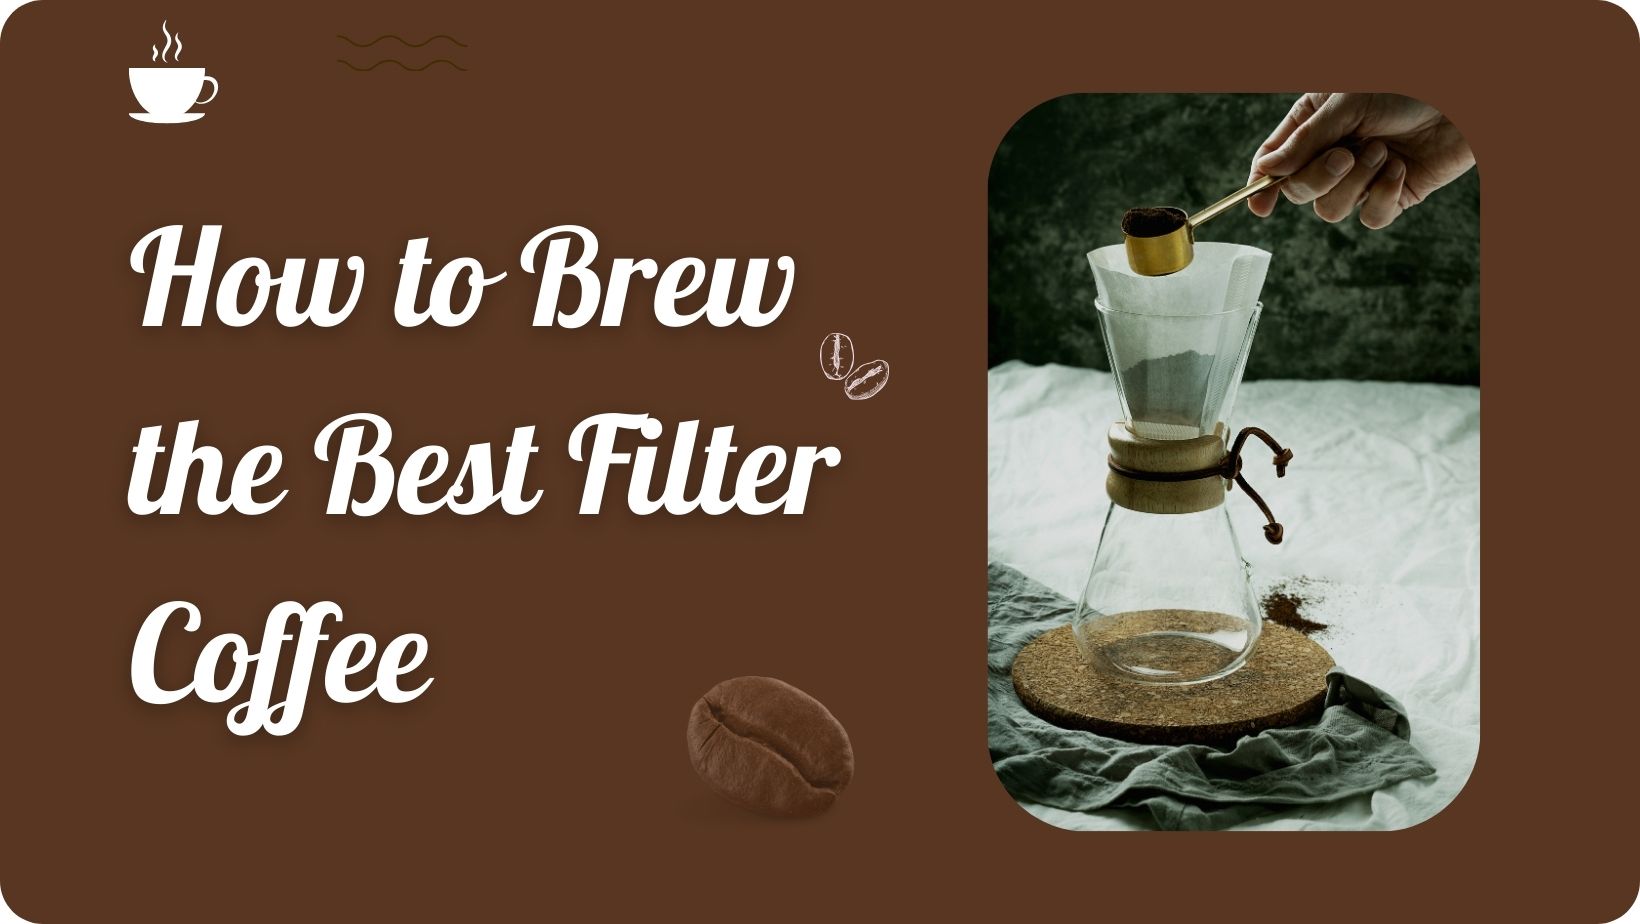 How to Brew the Best Filter Coffee: Coffee Brewing Methods?